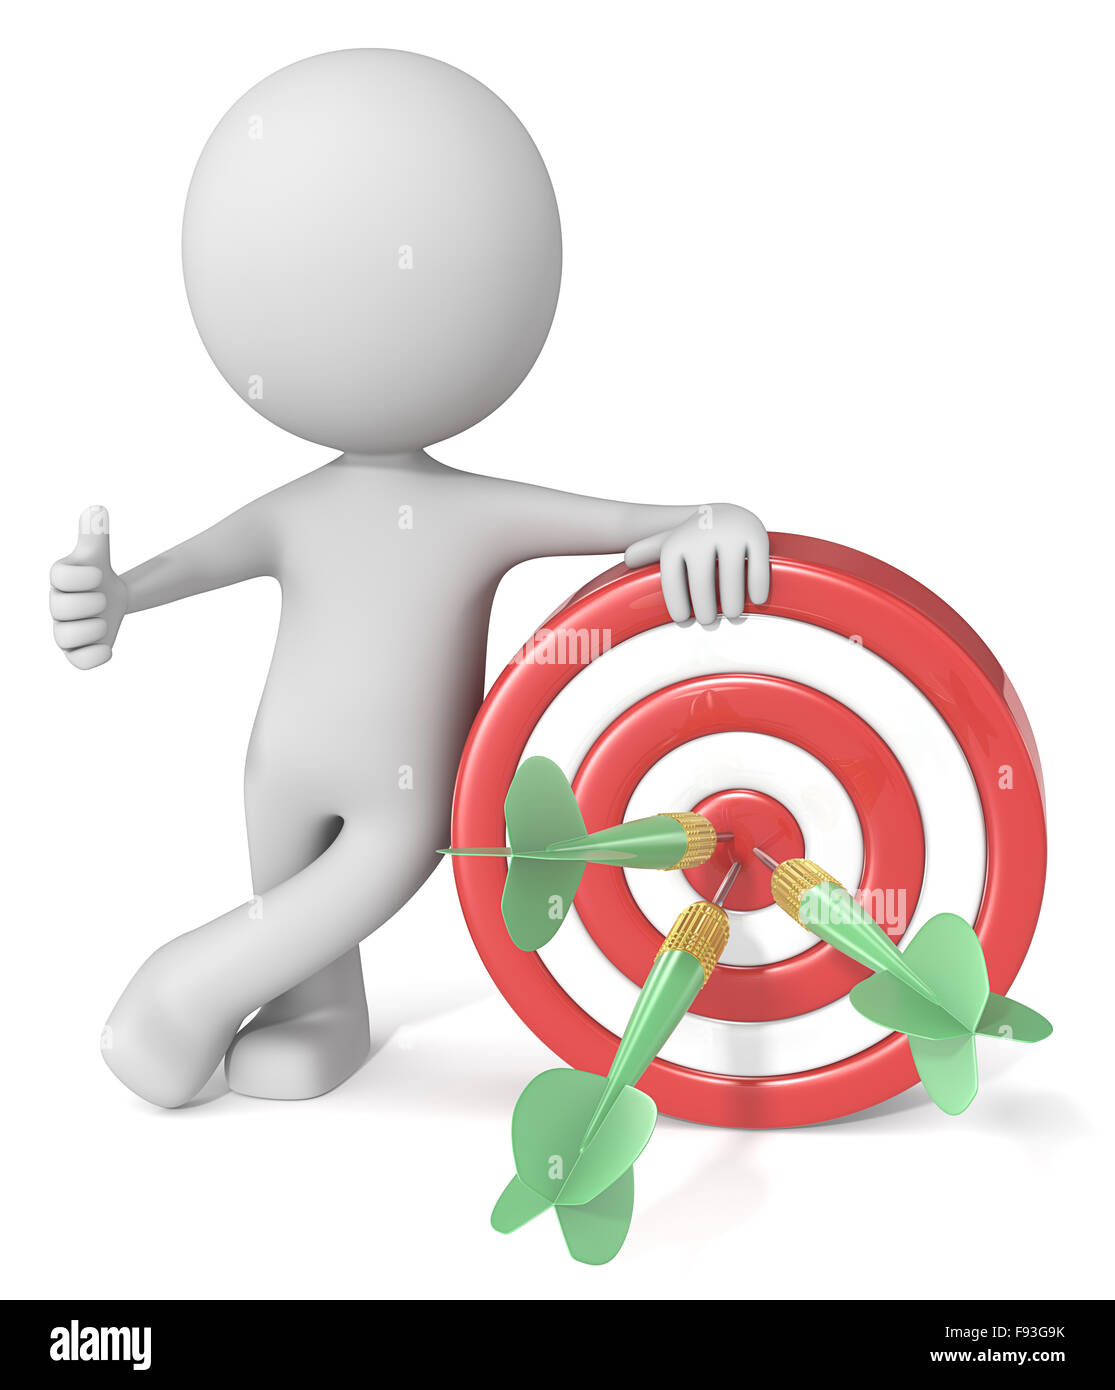 Dude 3D character giving thumbs up holding dartboard. Red and white board with green dart arrows. Stock Photo